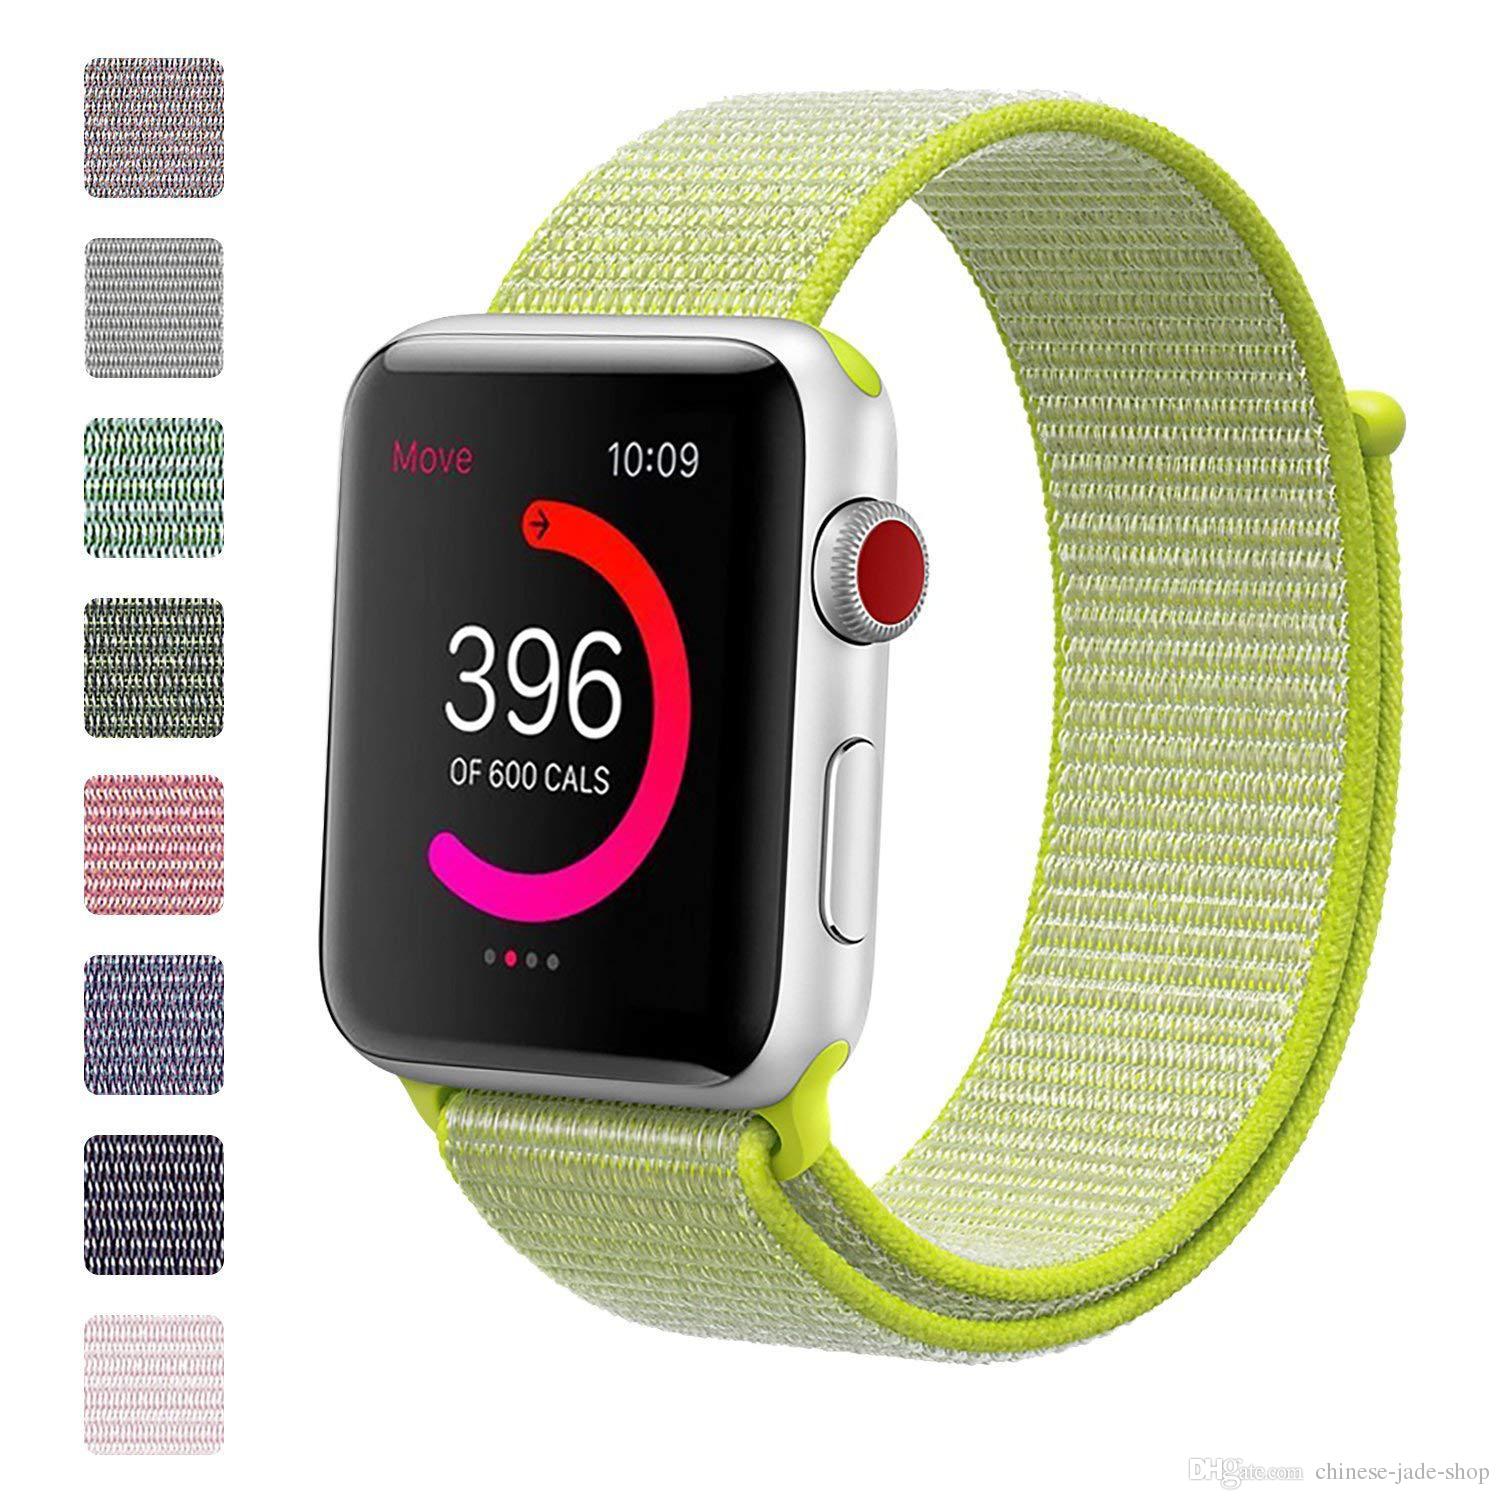 Woven Nylon Sport Loop Bracelet Watch Strap Replacement Band For Apple Watch Series 4 1 2 3 iwatch 4 38mm 42mm 40mm 44mm 200pcs